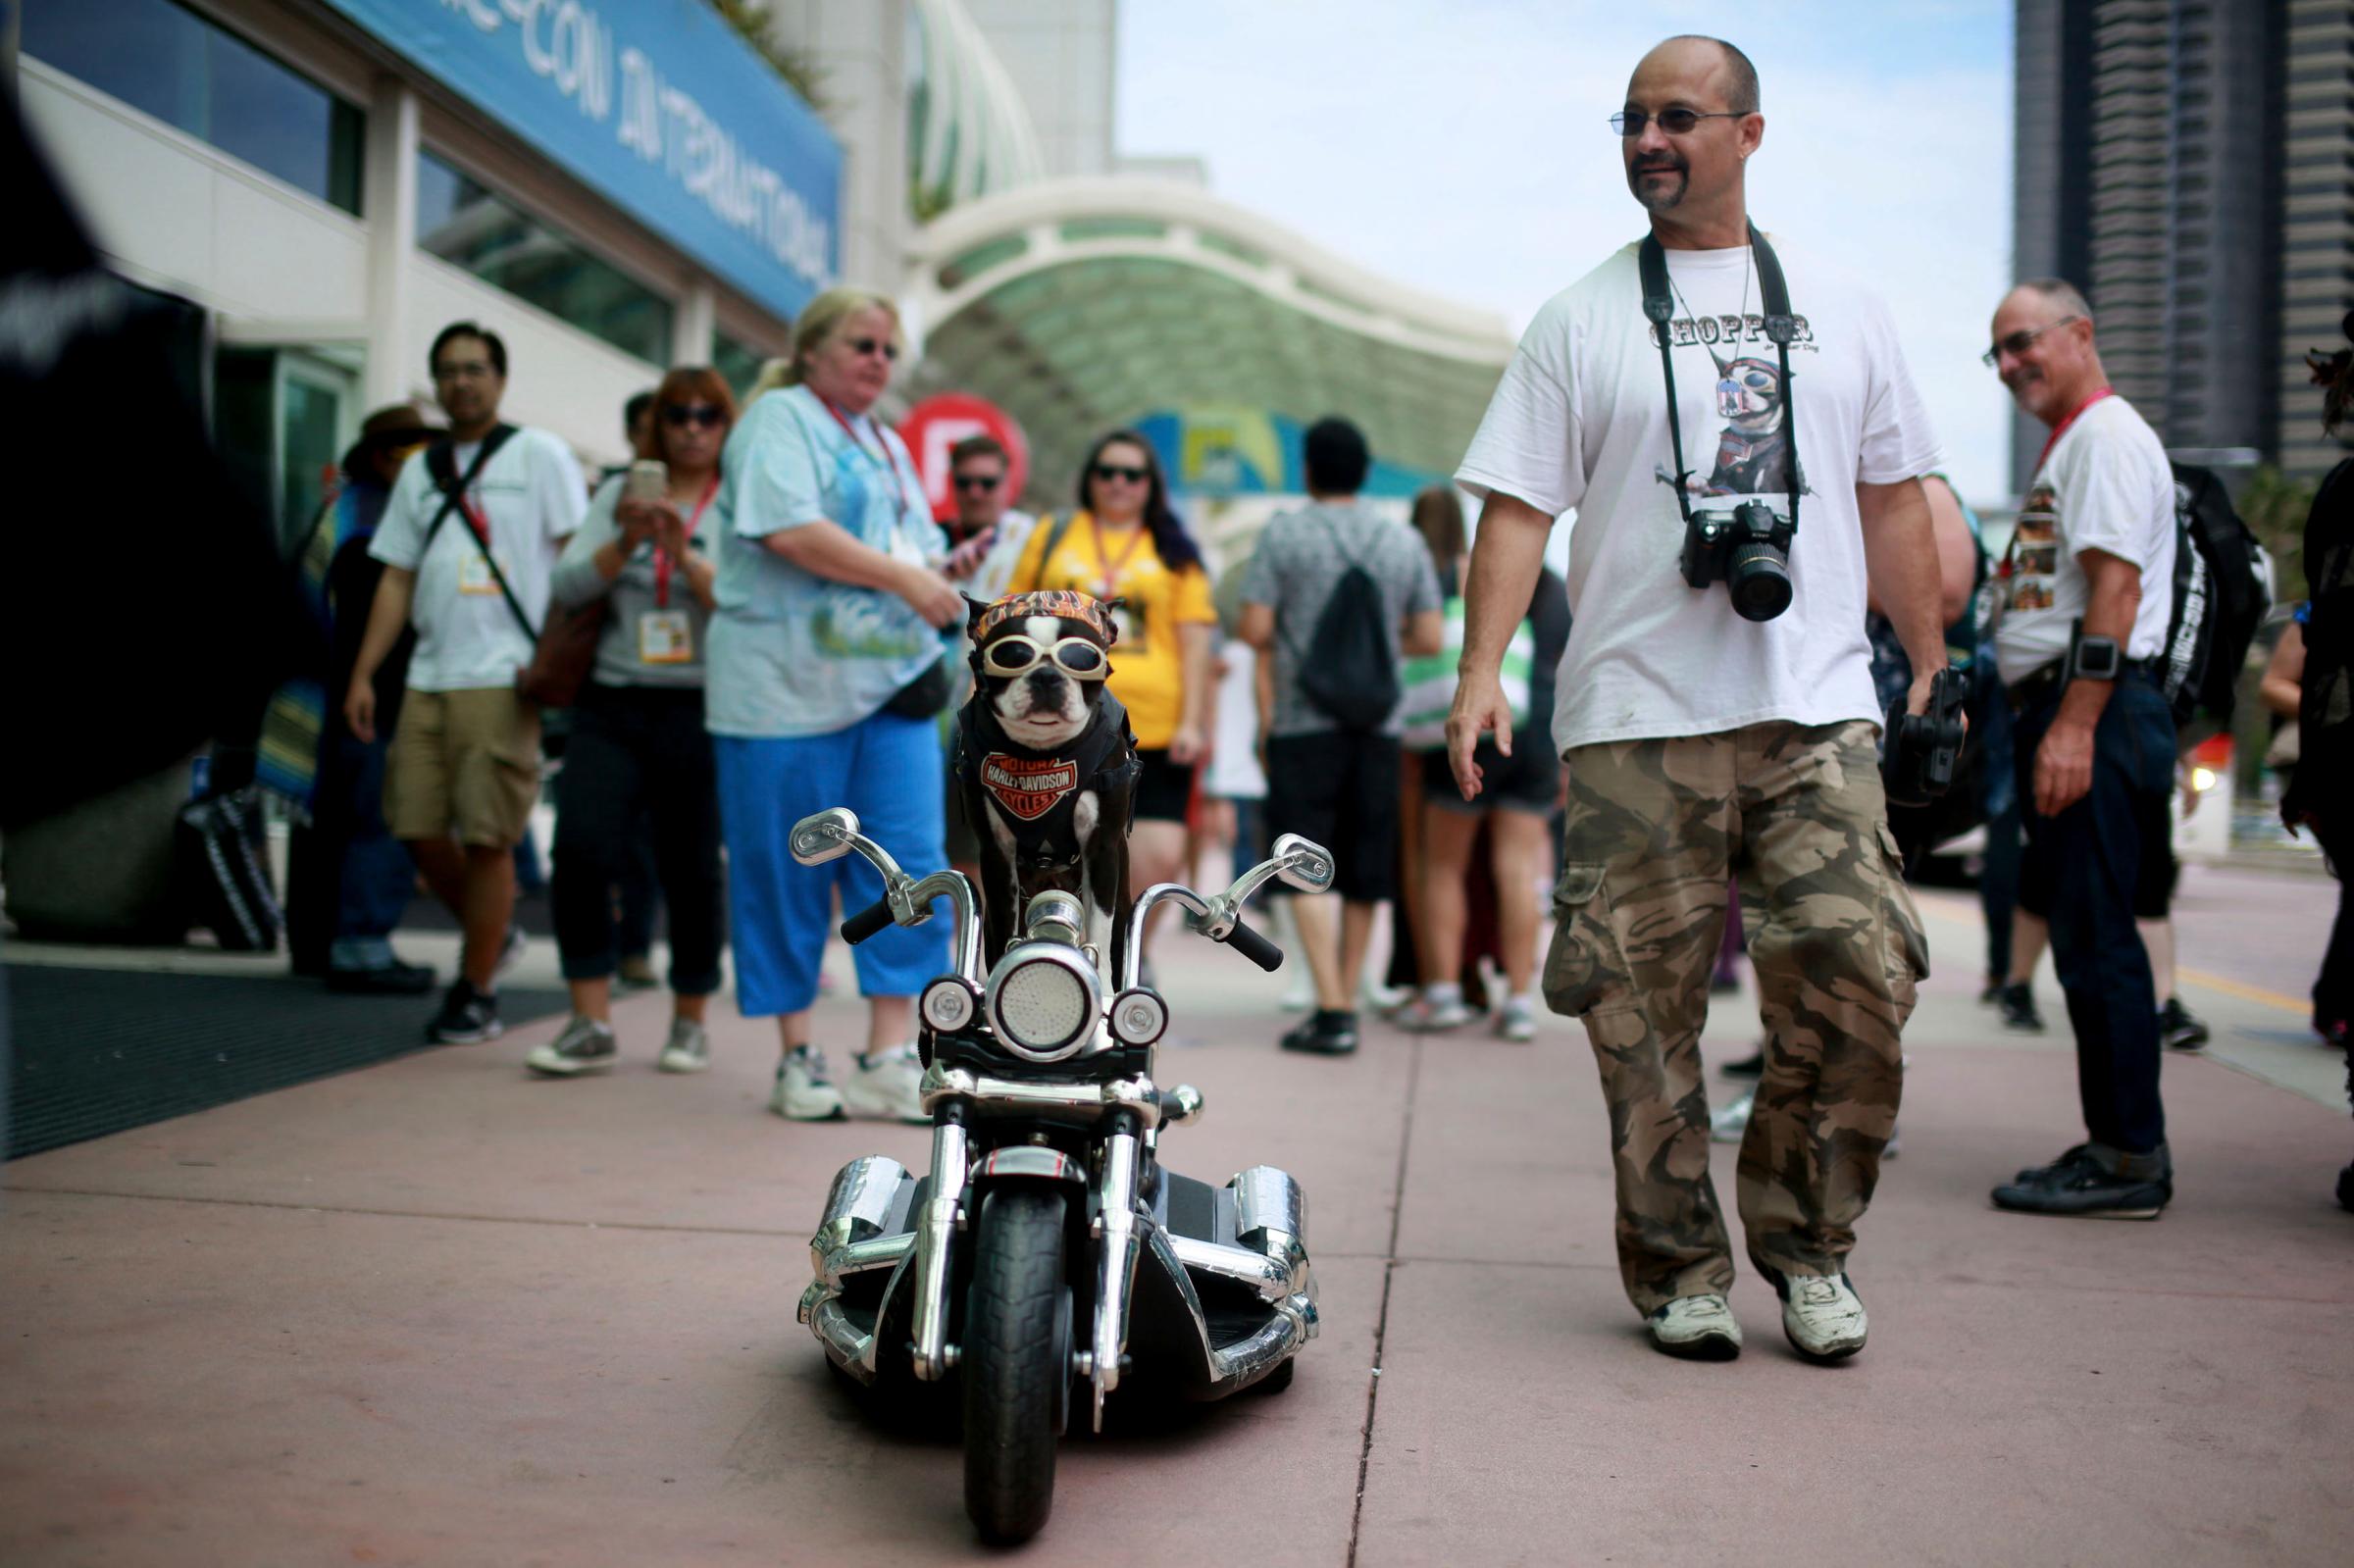 Mark Shaffer walks with Chopper The Biker Dog outside of the San Diego Convention Center during the 2014 Comic-Con International Convention in San Diego